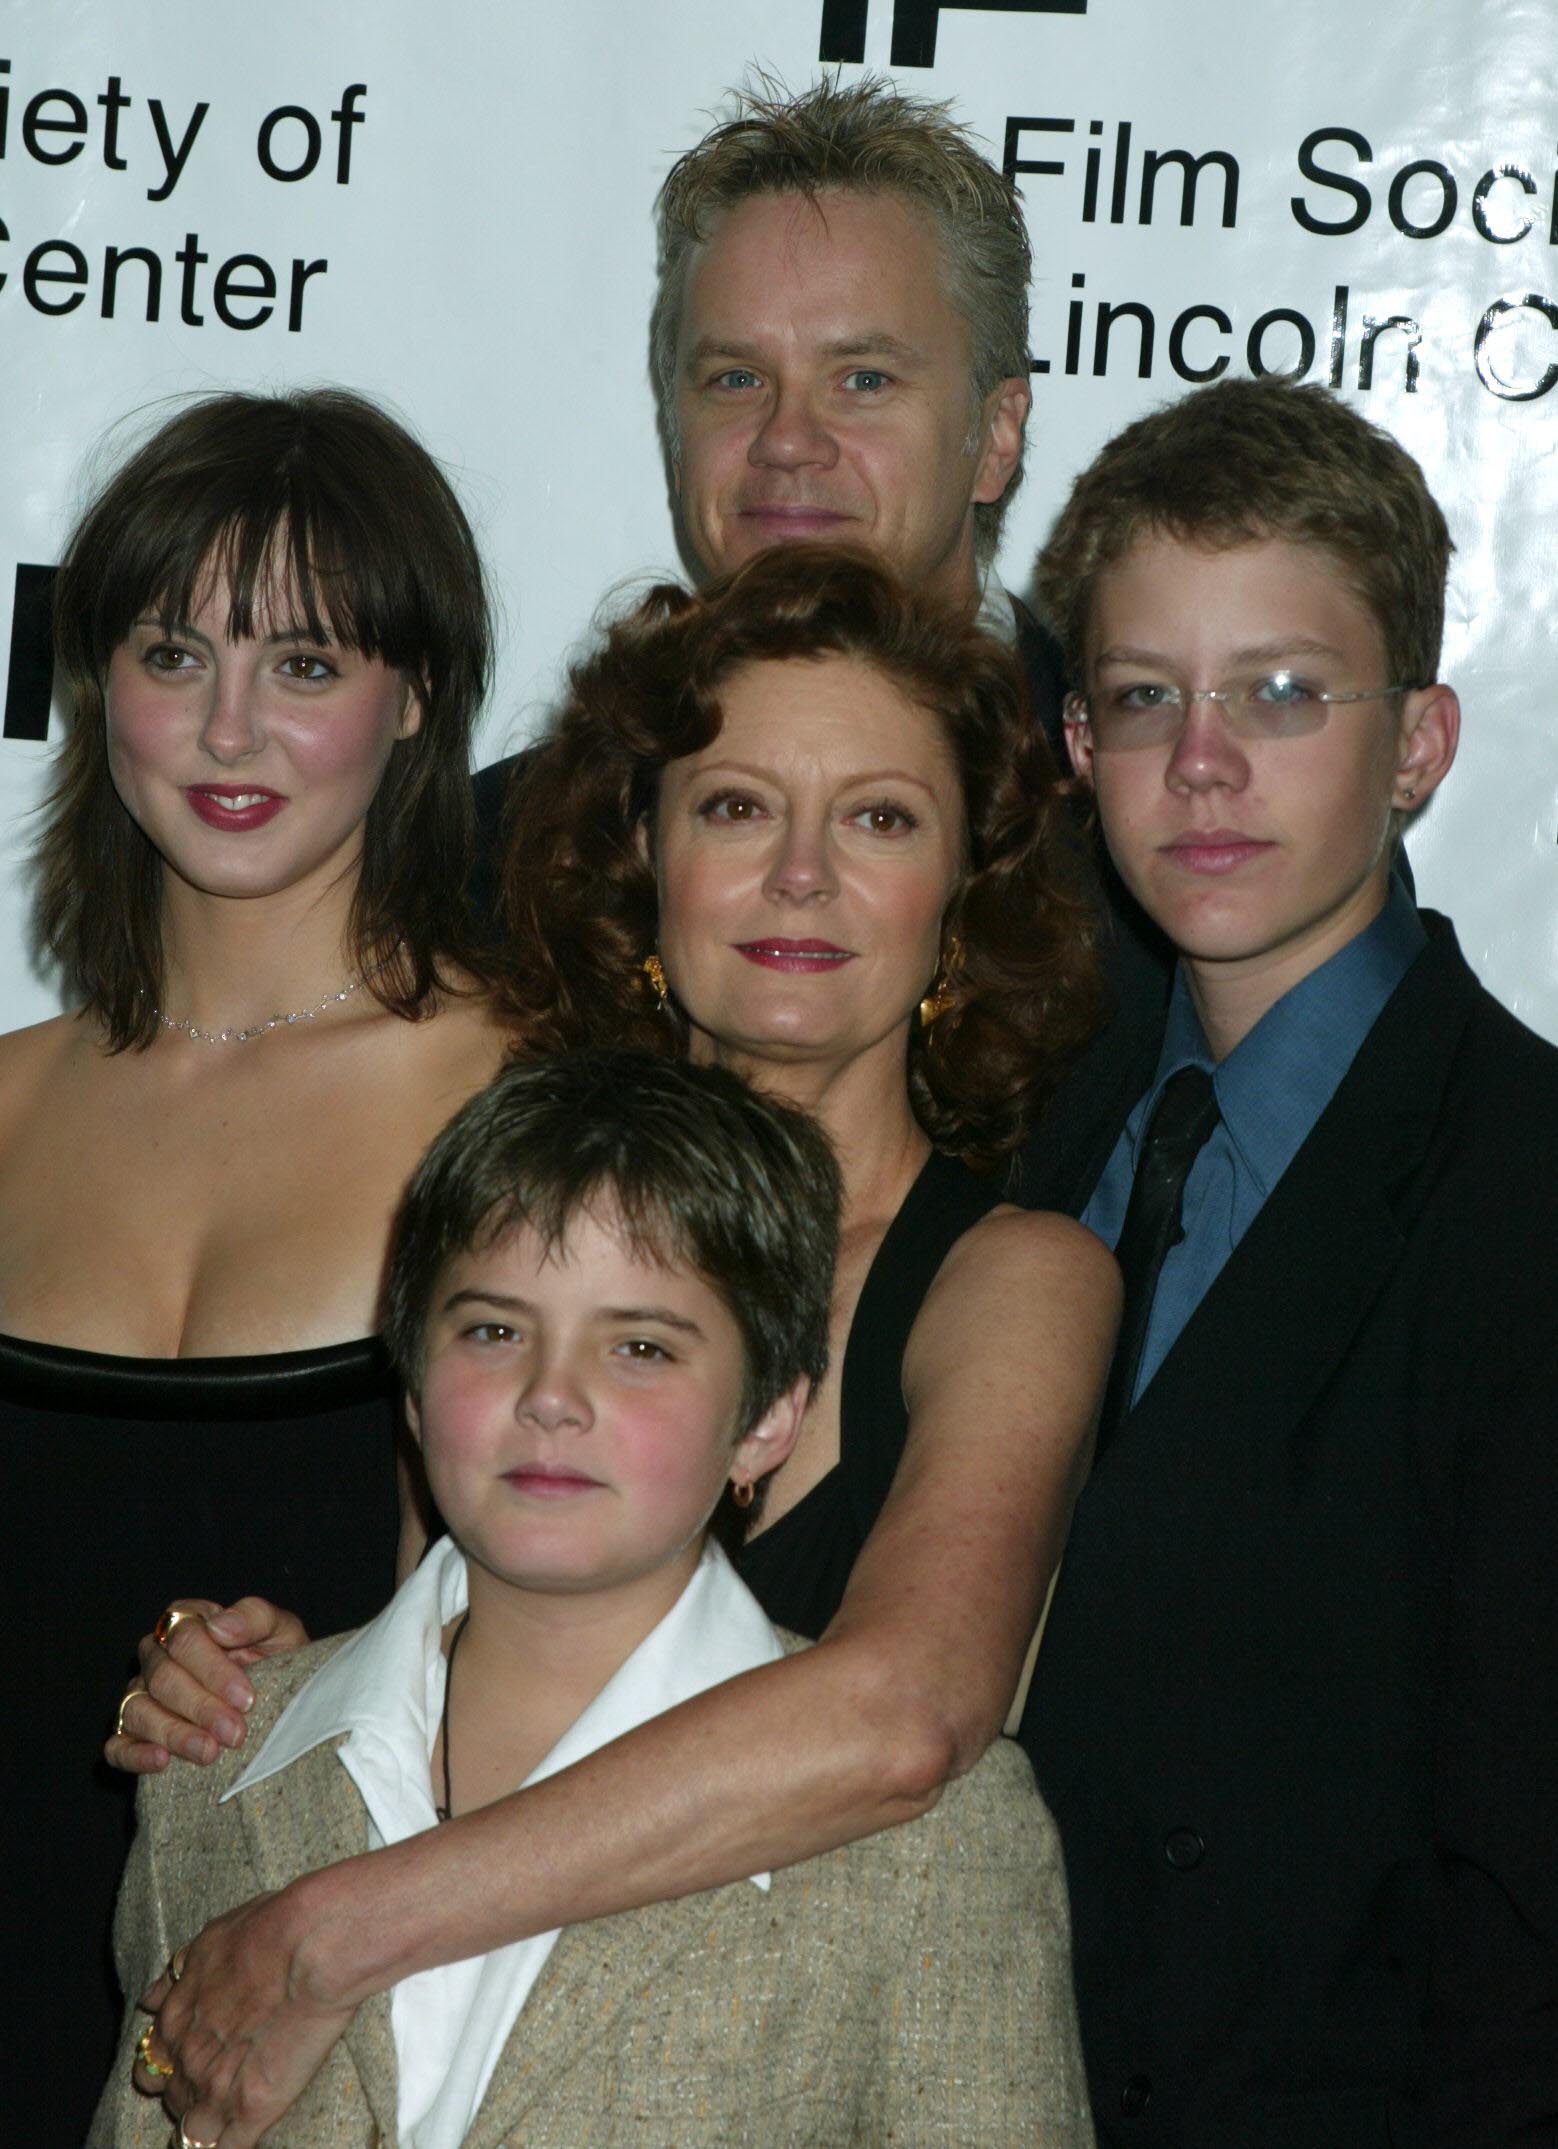 Susan Sarandon and Tim Robbins with (from clockwise) sons Jack Henry and Miles and daughter Eva Amurri at the Film Society of Lincoln Center | Source: Getty Images